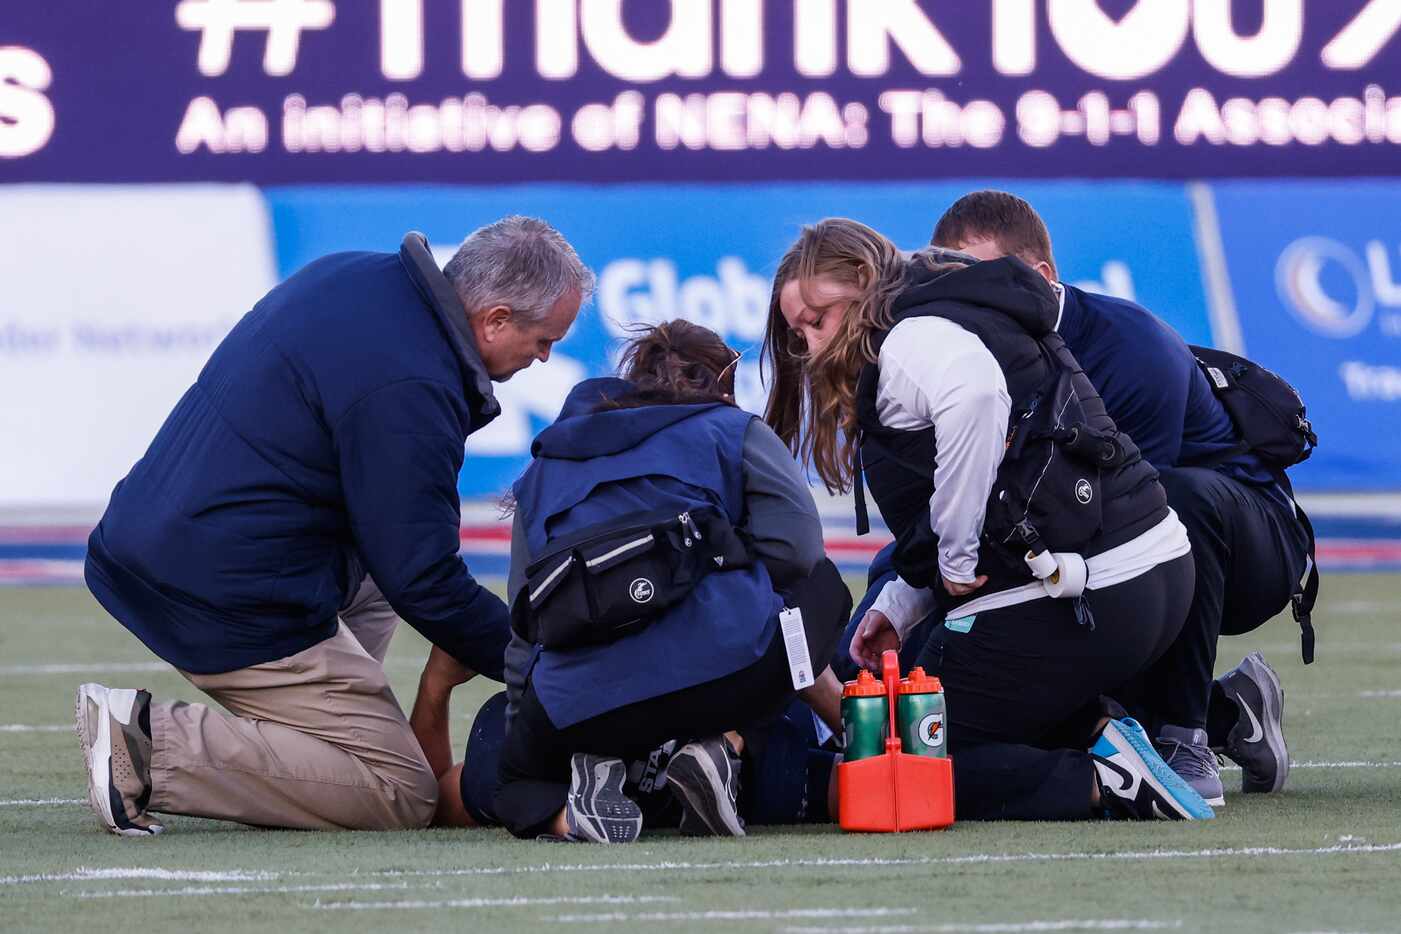 Utah State Aggies quarterback Cooper Legas (5) attended by medical staff after being sacked...